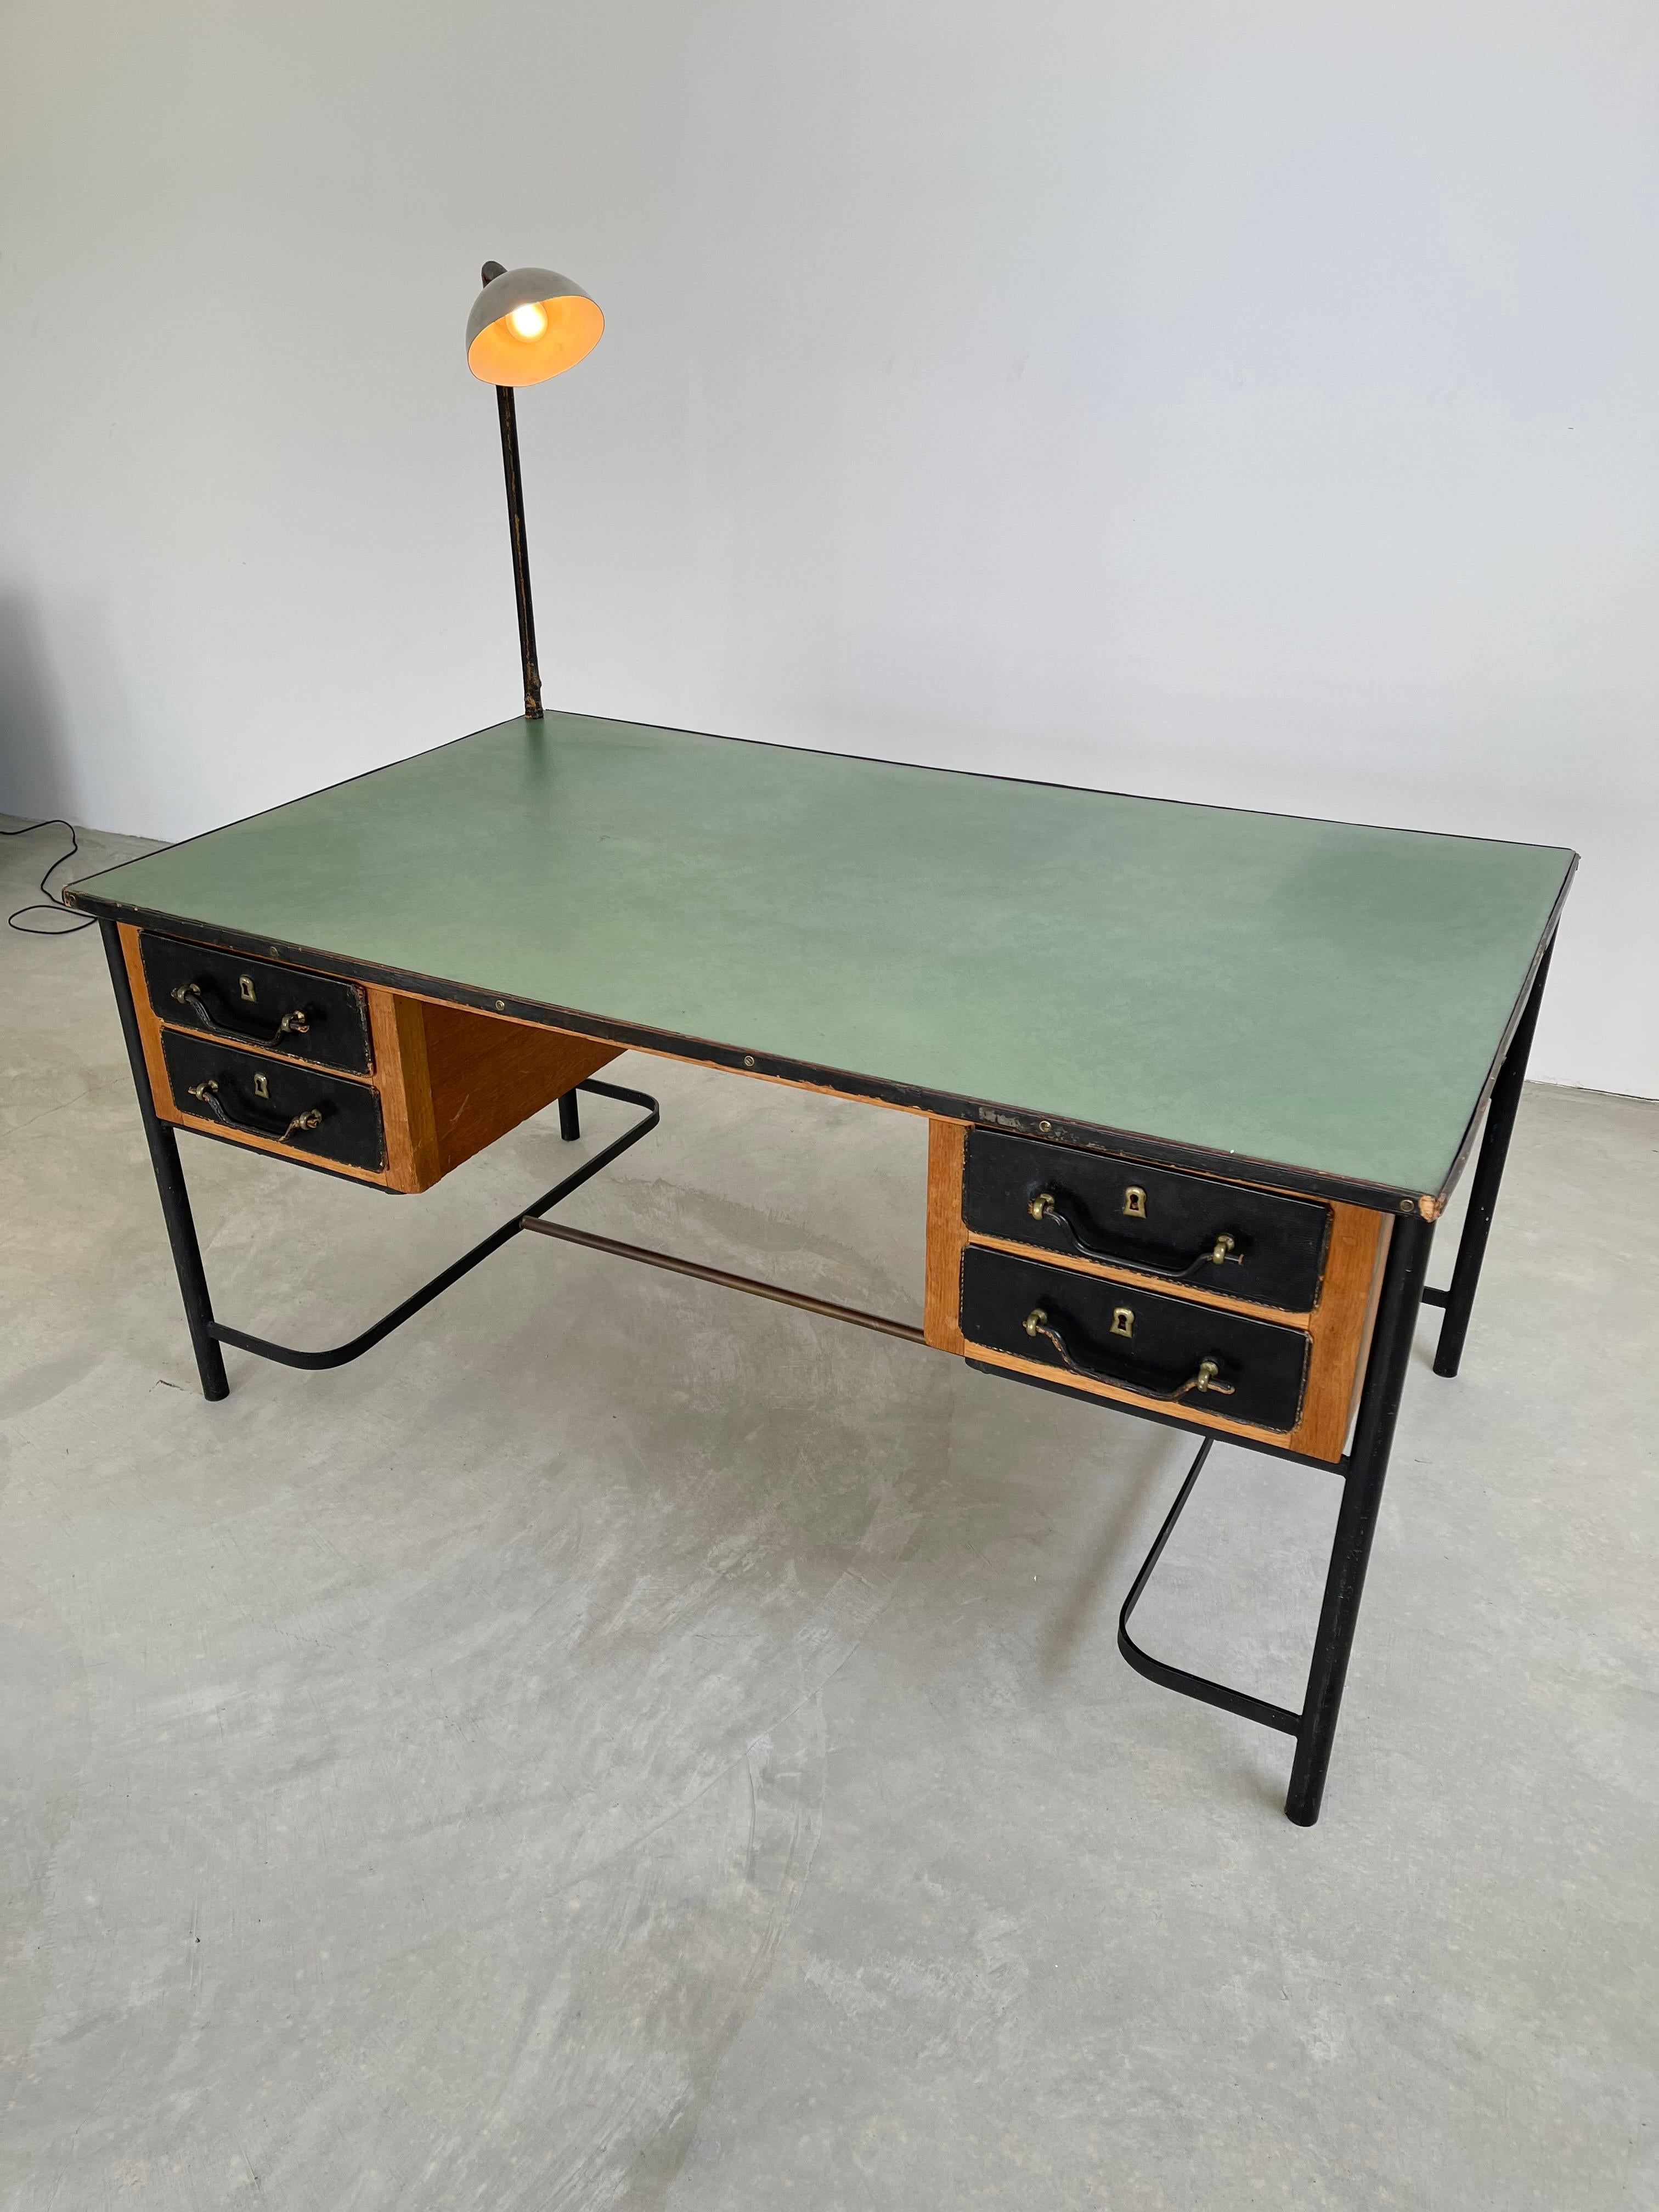 Hand-Crafted Jacques Adnet Leather and Oak Desk, 1950s France For Sale